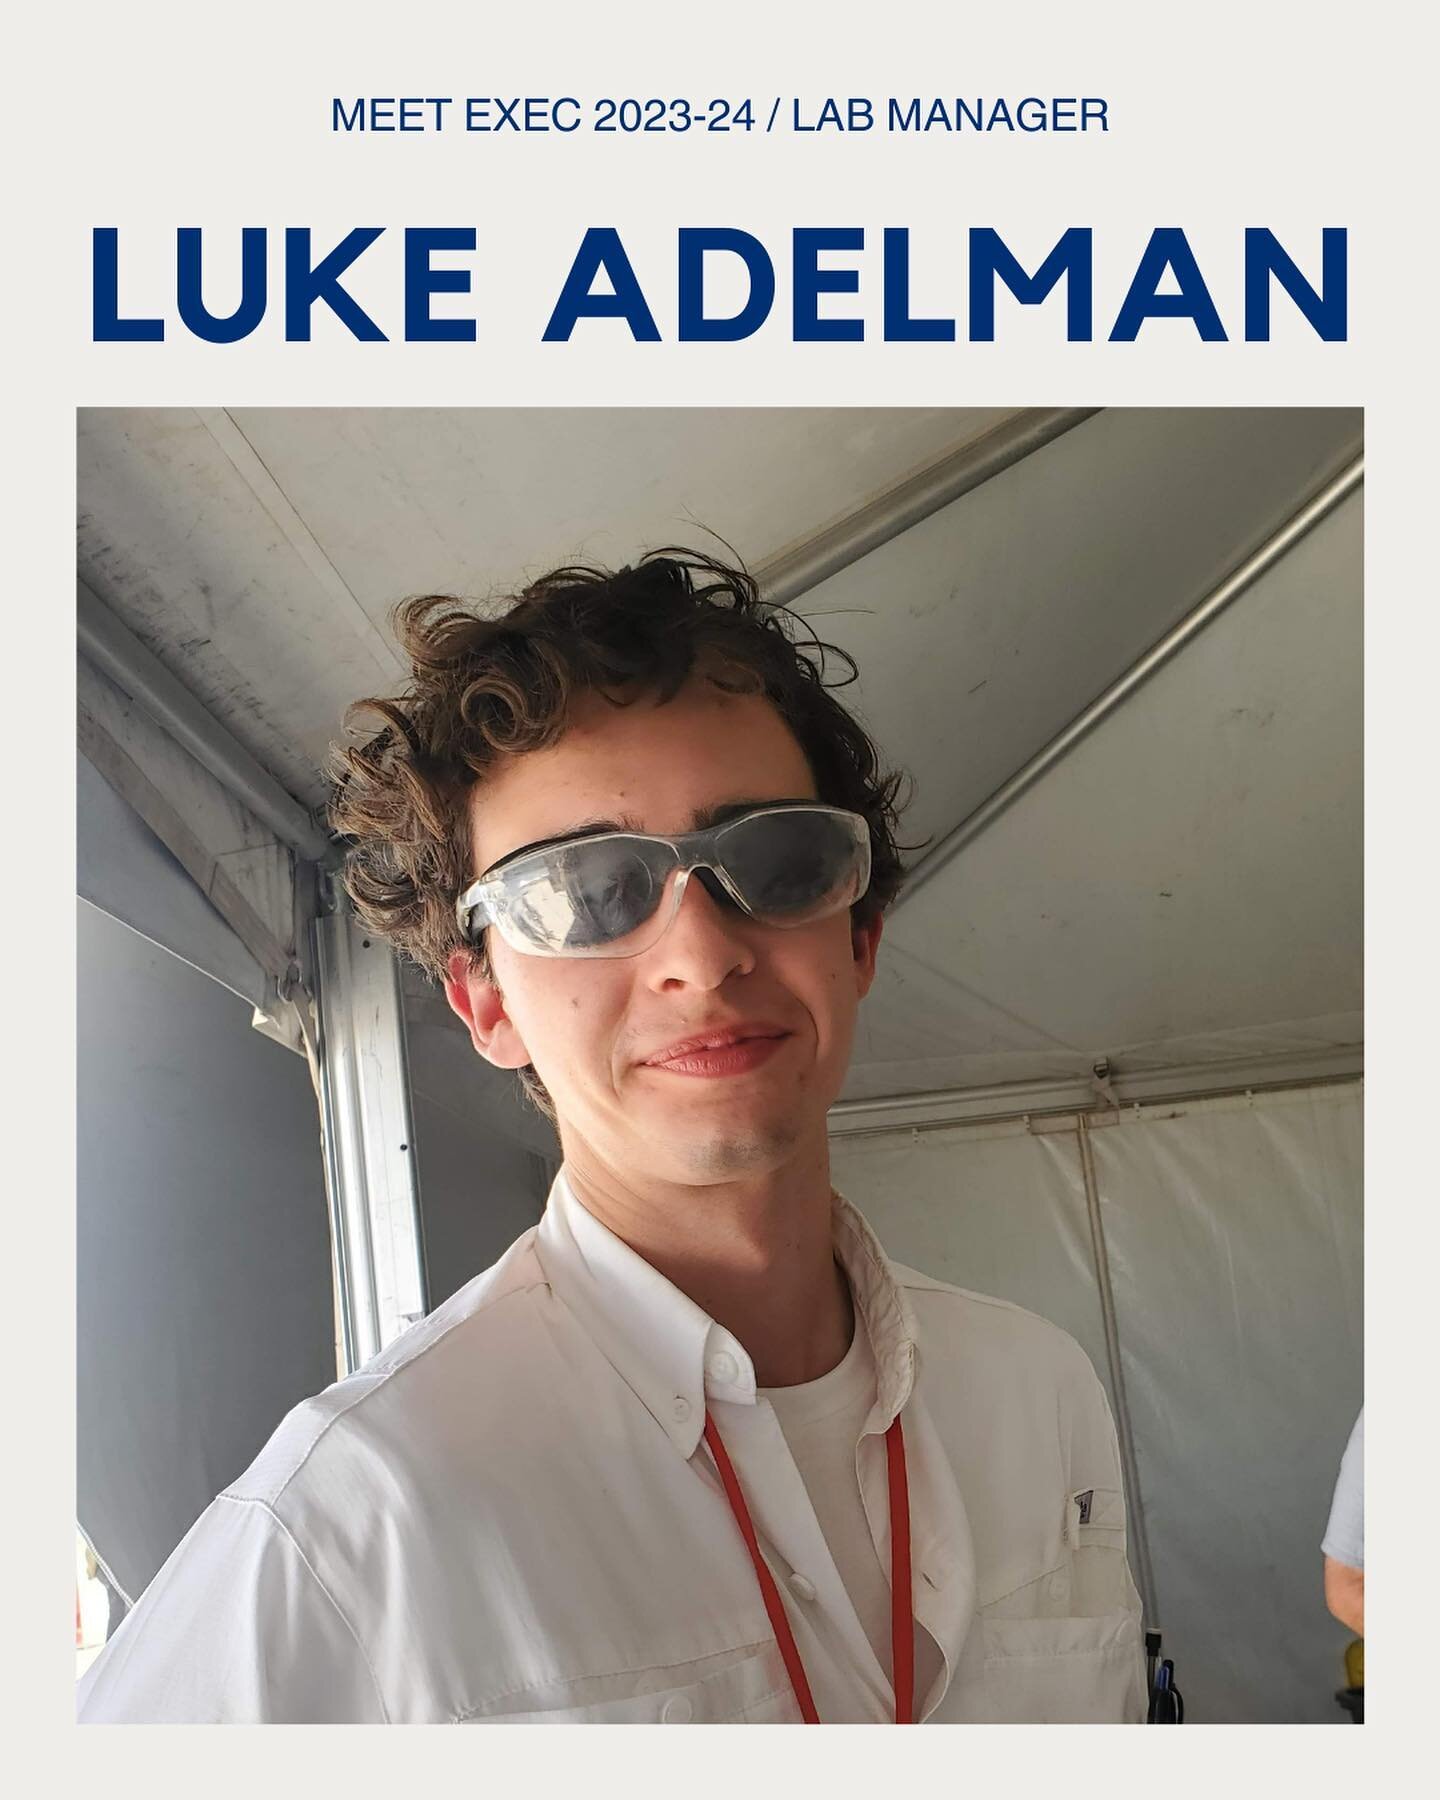 Leading the way in our CRT bay is this year&rsquo;s Lab Manager, Luke Adelman! 

Luke&rsquo;s tremendous work as Payload lead, leadership, and technological know-how makes him a great addition to the committee as lab manager.

#caserocketteam #crt #c